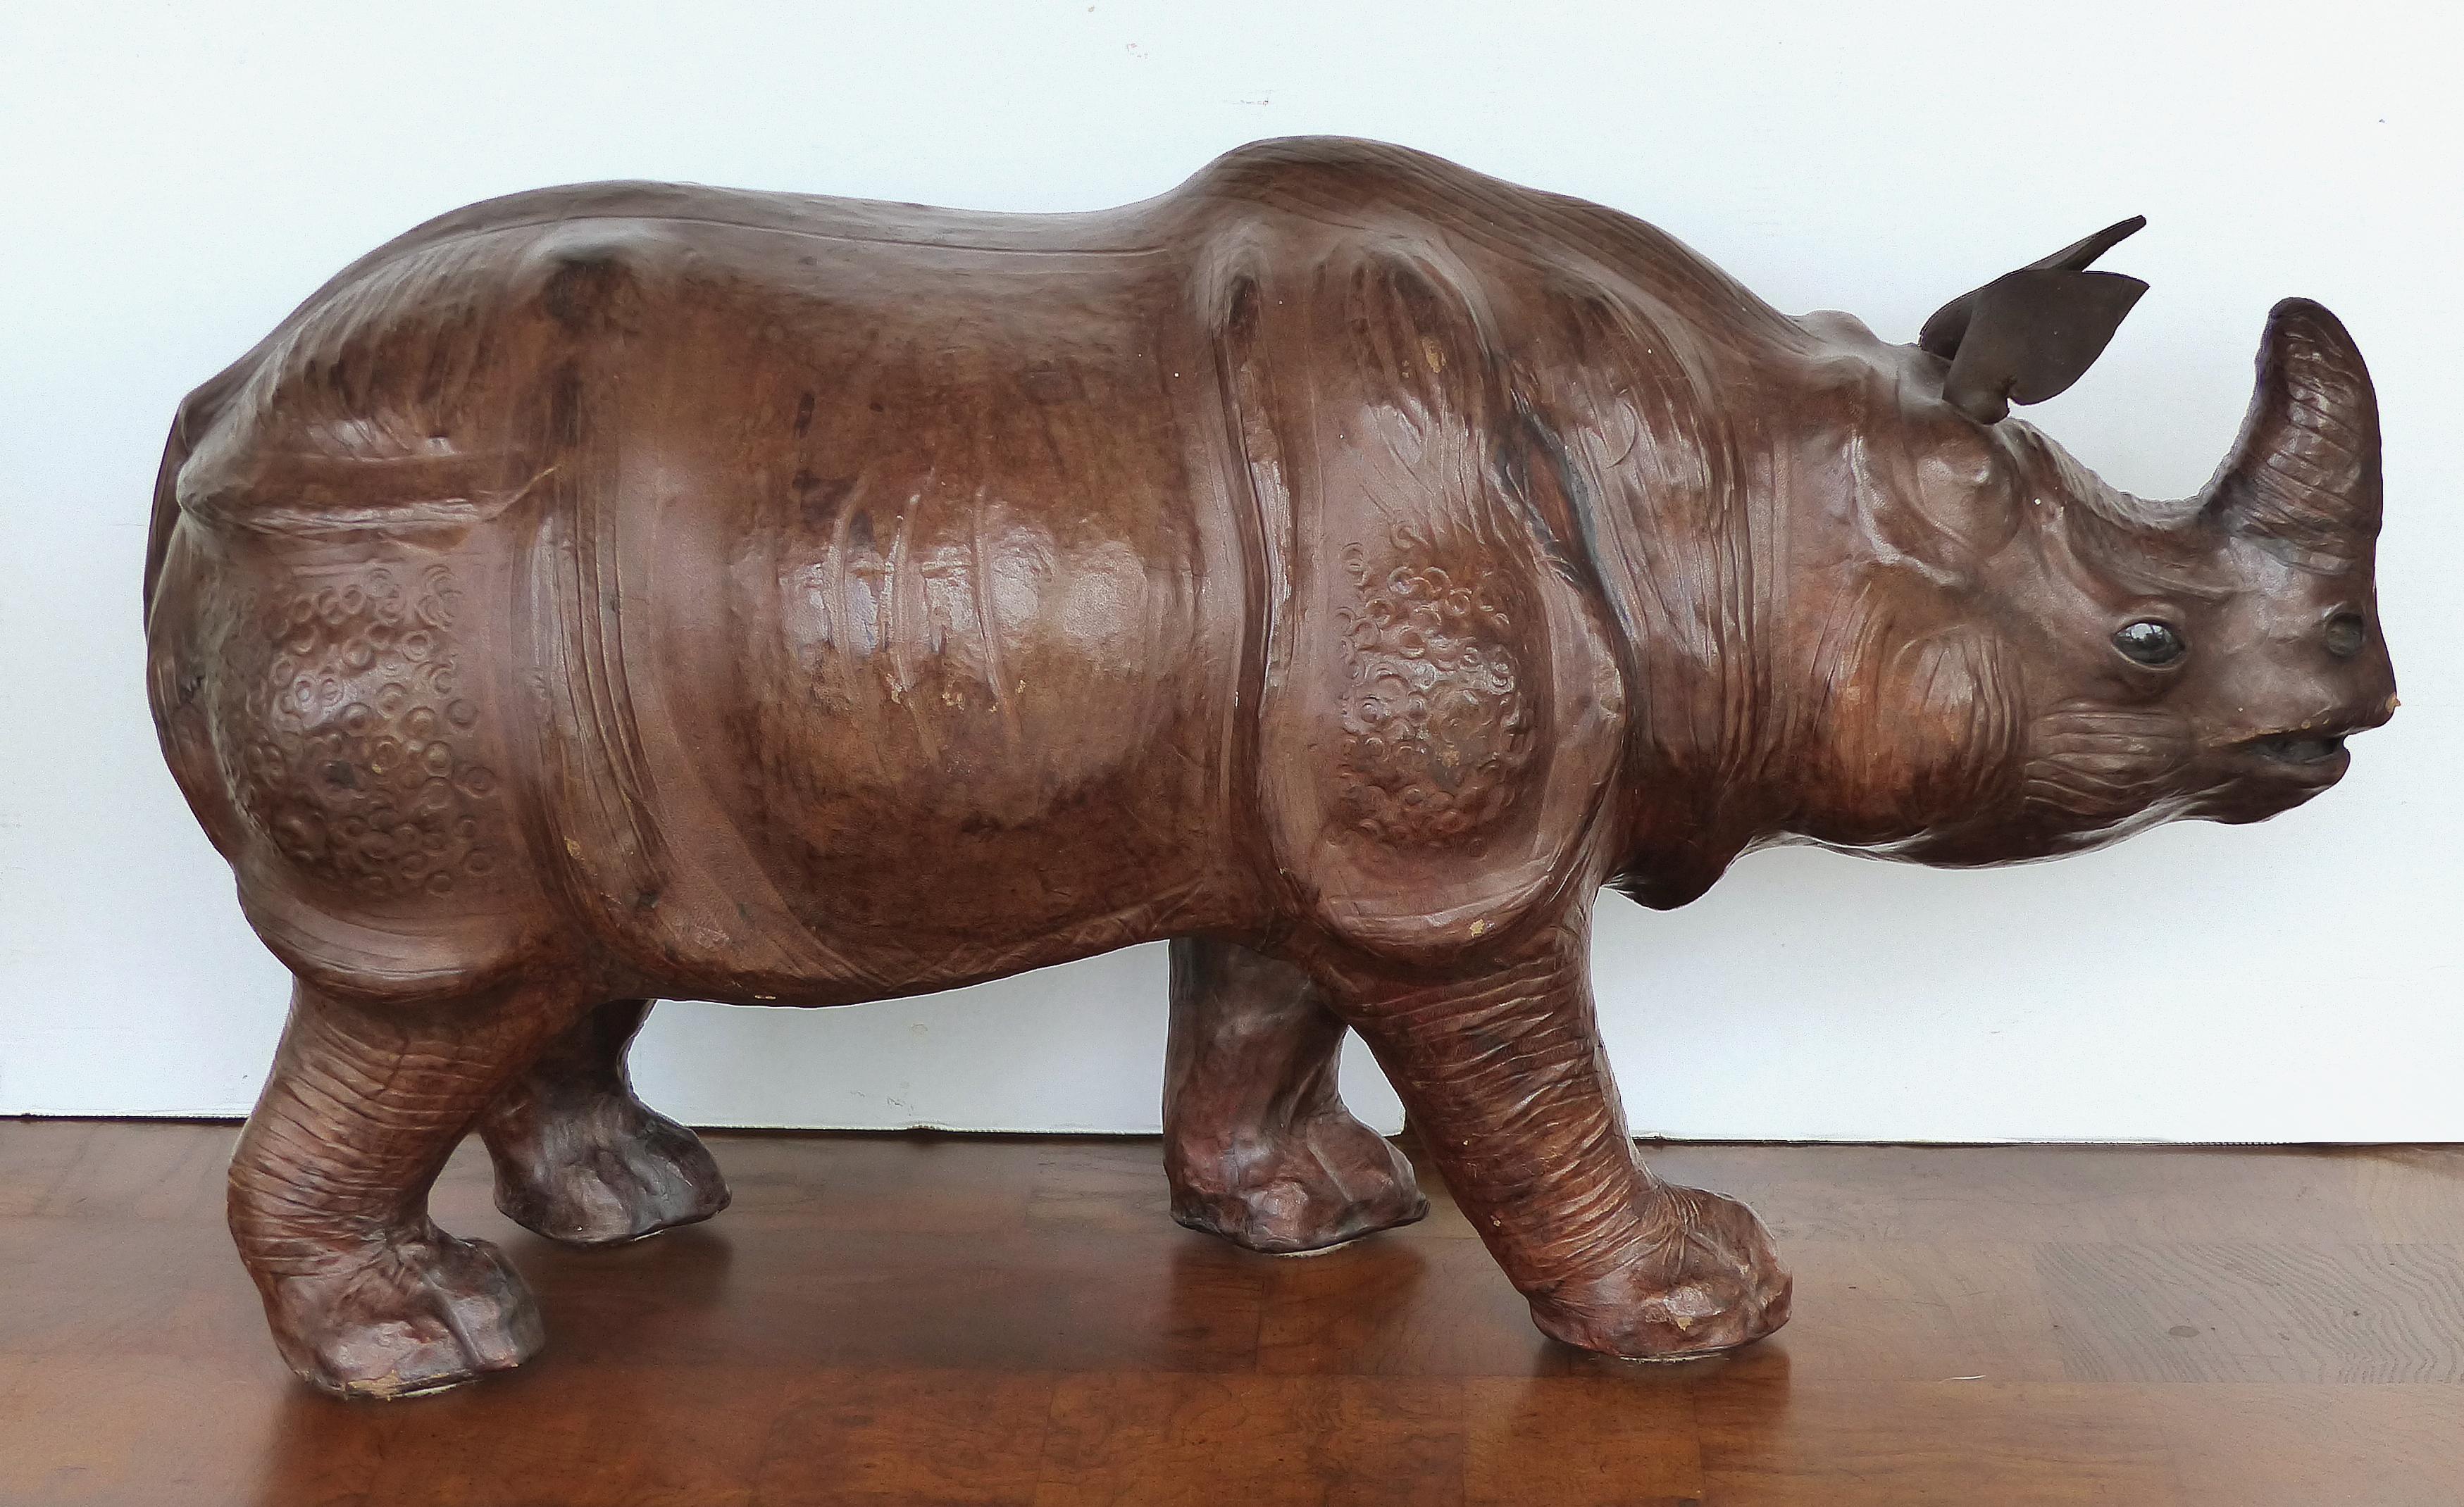 Large Leather Rhinoceros Sculpture with Glass Eyes

Offered for sale is a large and finely detailed leather clad sculpture of a rhinoceros. The rhinoceros has inset glass eyes and a leather tail and ears. The body of the rhino is tooled leather